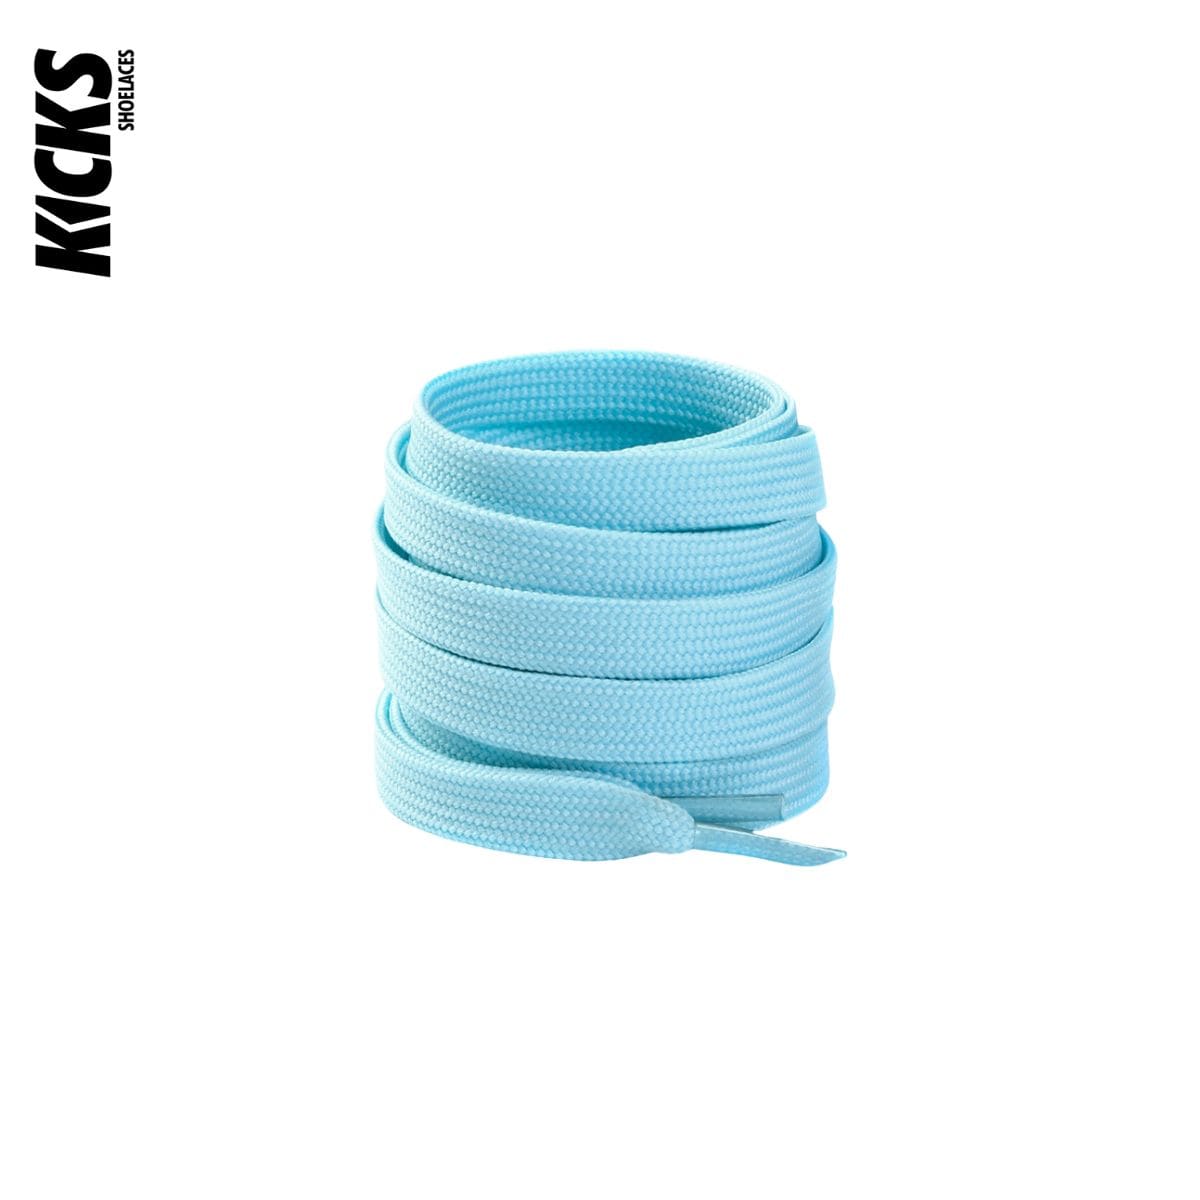 Light Blue Replacement Shoe Laces for Adidas NMD Sneakers by Kicks Shoelaces